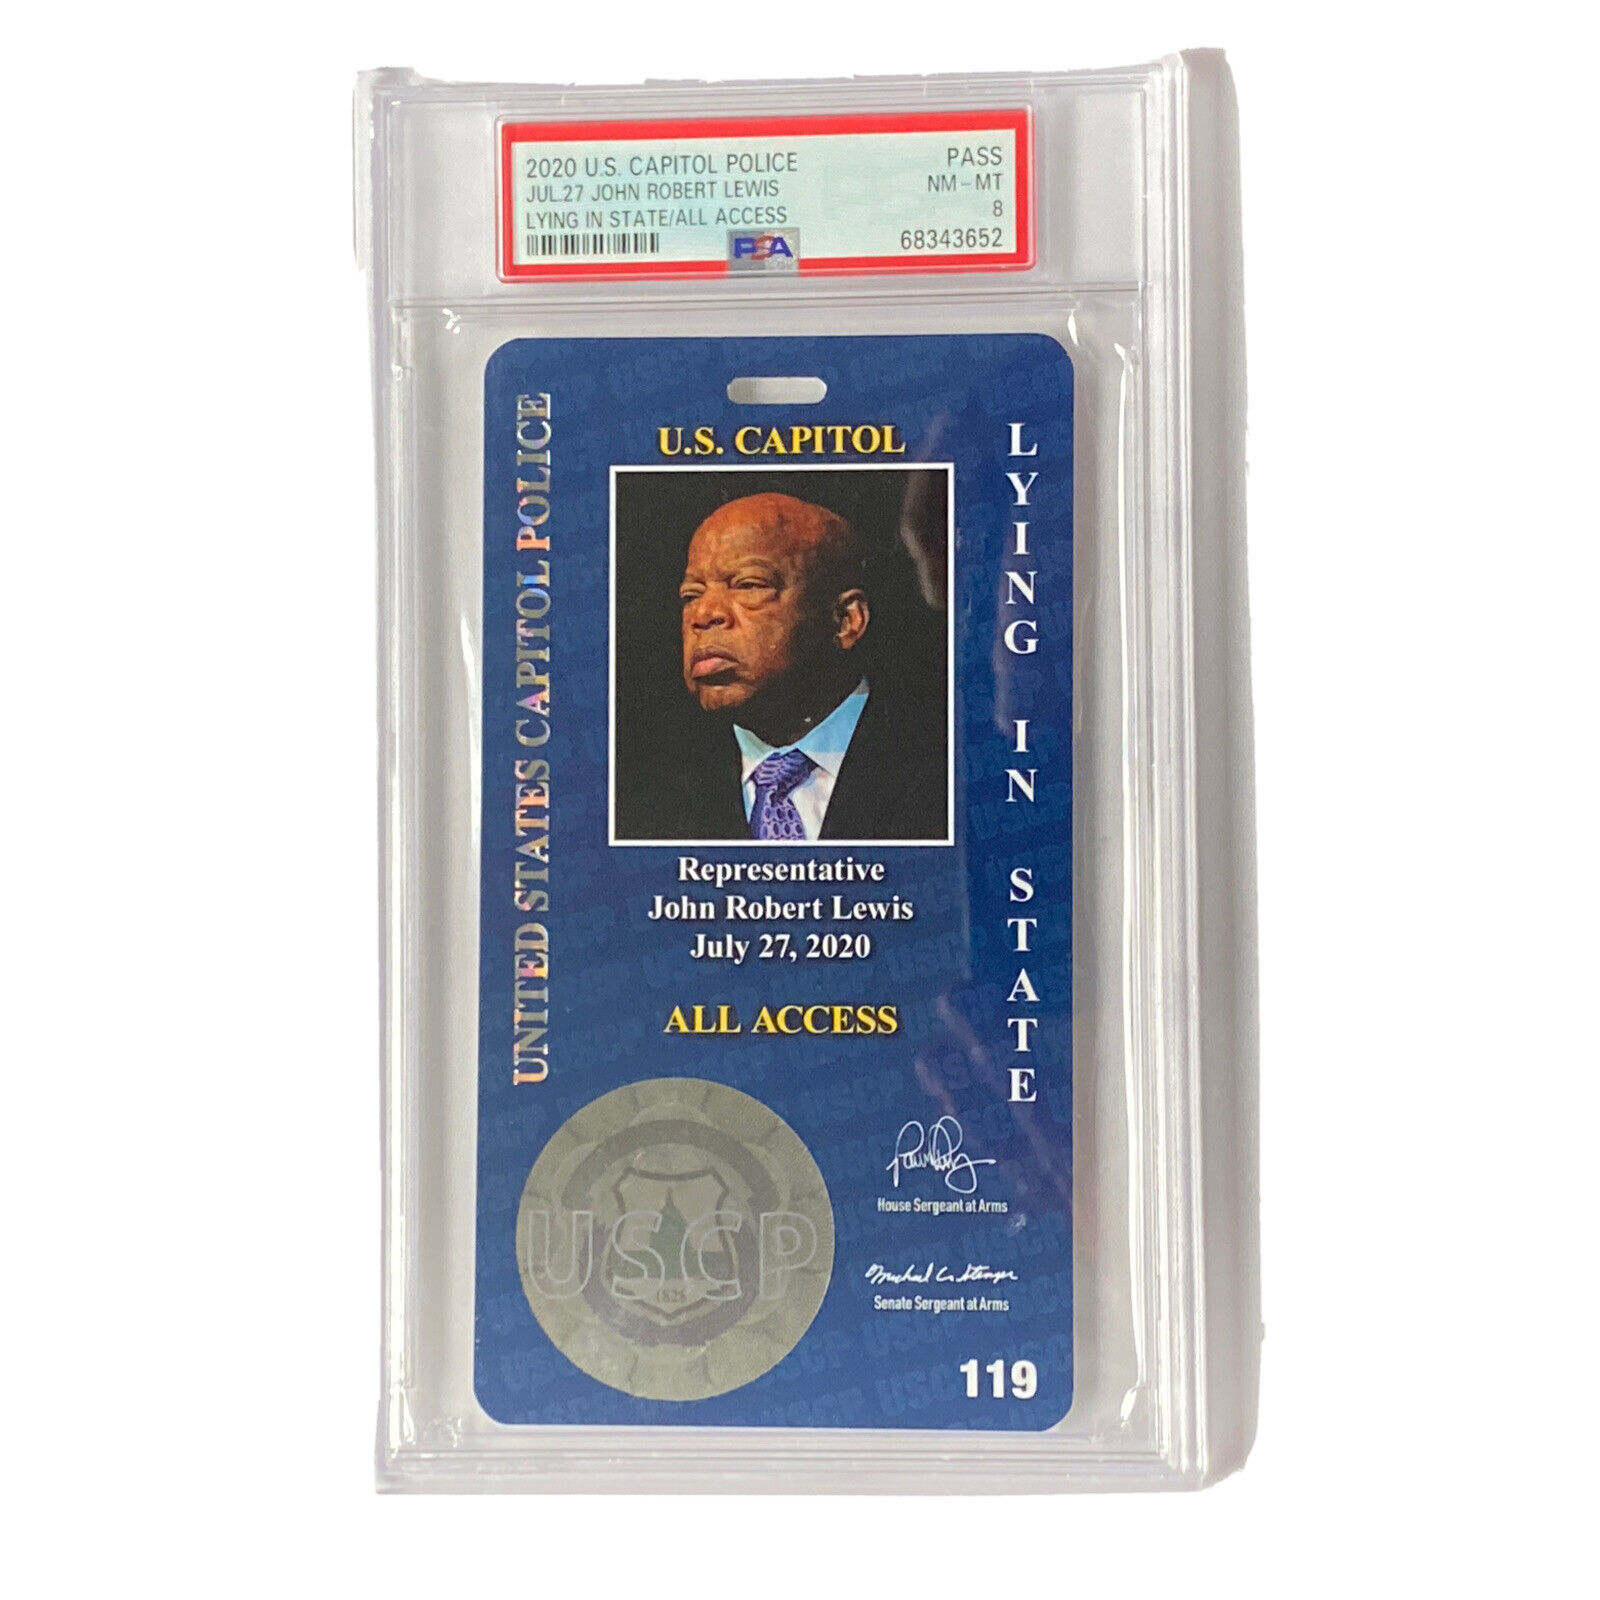 2020 John Lewis Lying In State All Access U.S. Capitol Police Credential PSA